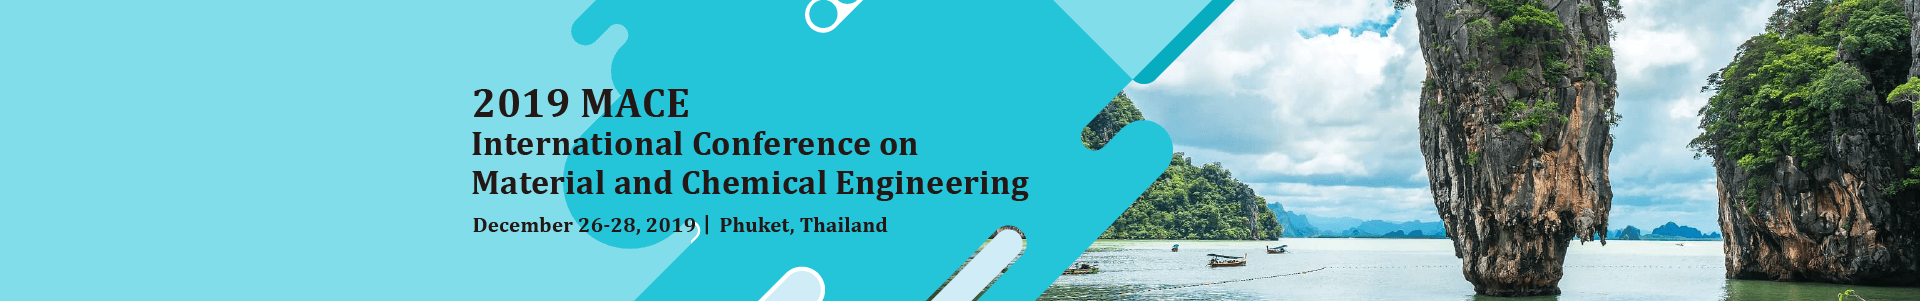 International Conference on Material and Chemical Engineering (MACE), Phuket, Thailand